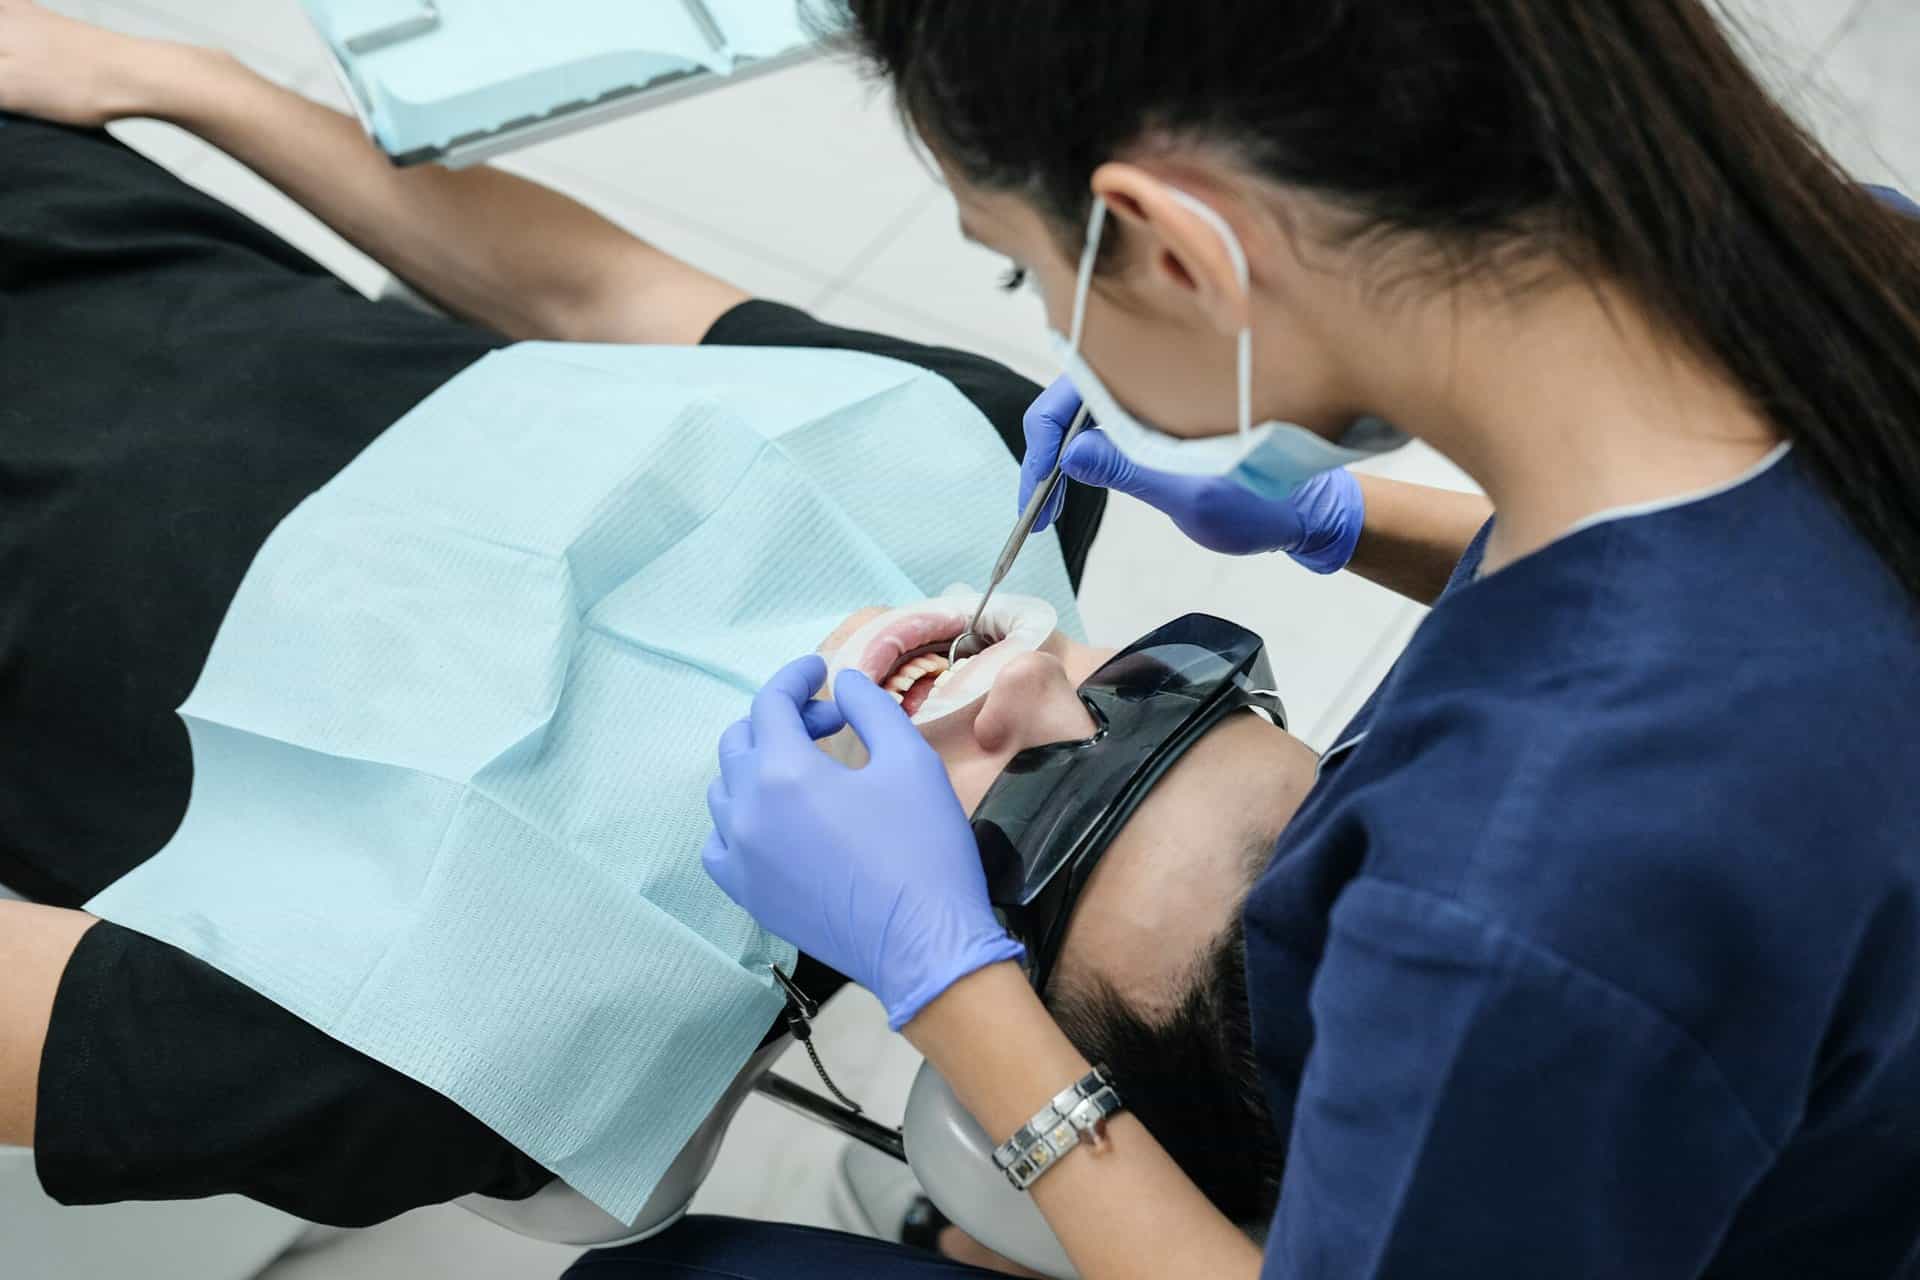 Featured image for “Here’s How Willis College Is Developing Innovative Programs To Make Becoming A Dental Assistant Easier”